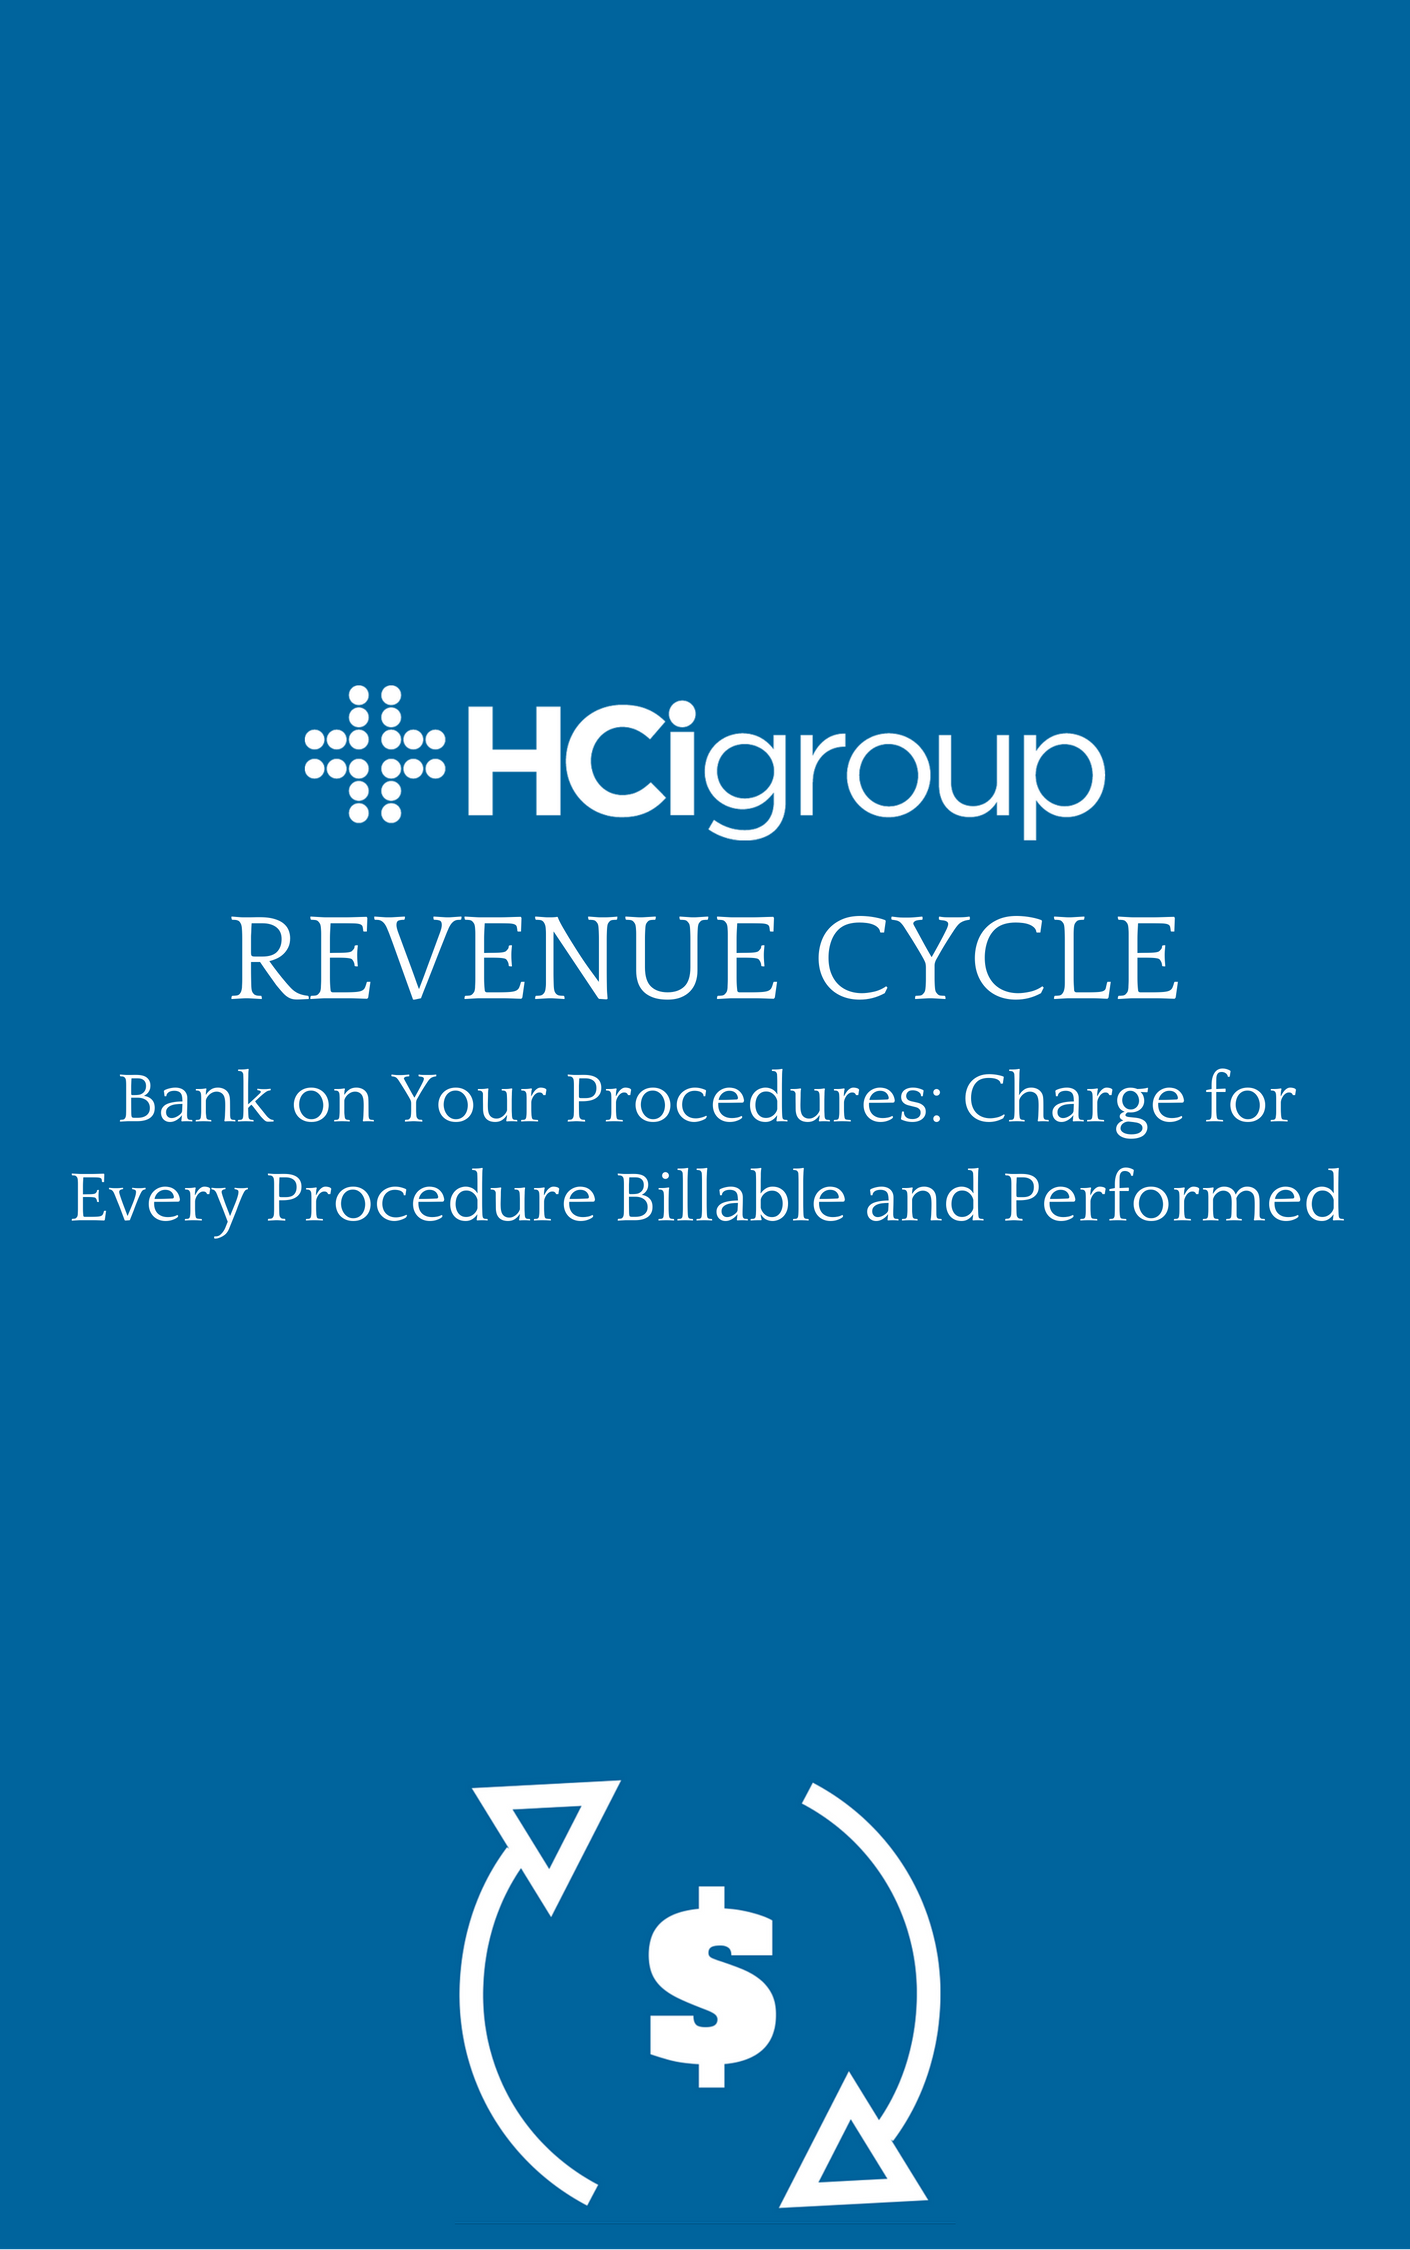 Revenue Cycle Management (RCM). Bank on your Procedures: Charge for every procedure billable and performed.